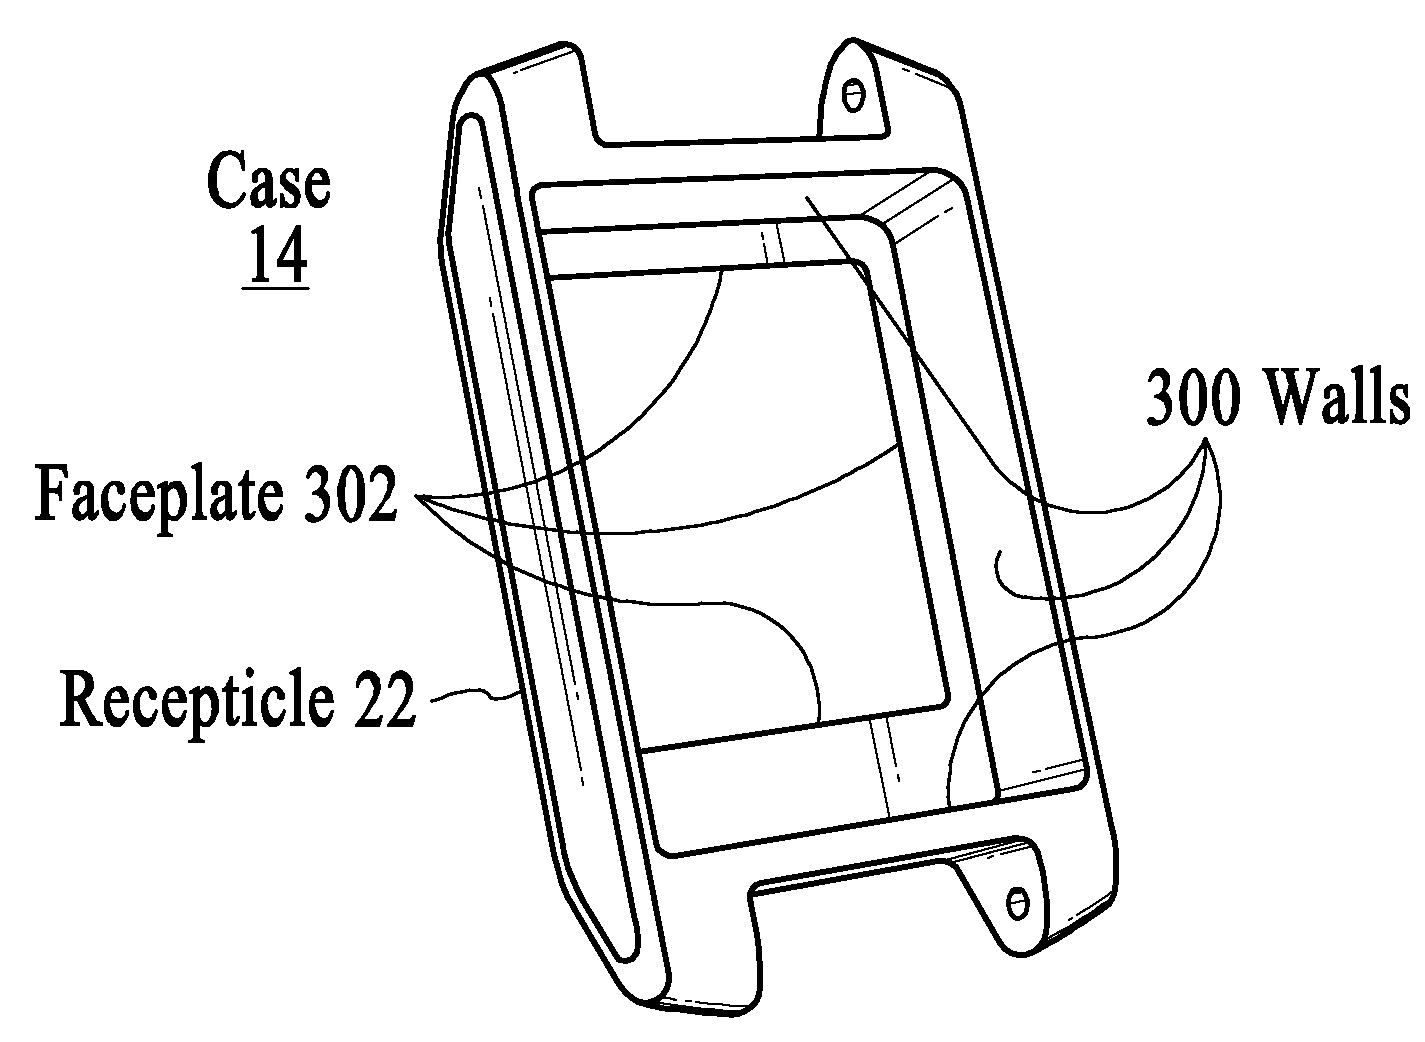 Modular movement that is fully functional standalone and interchangeable in other portable devices